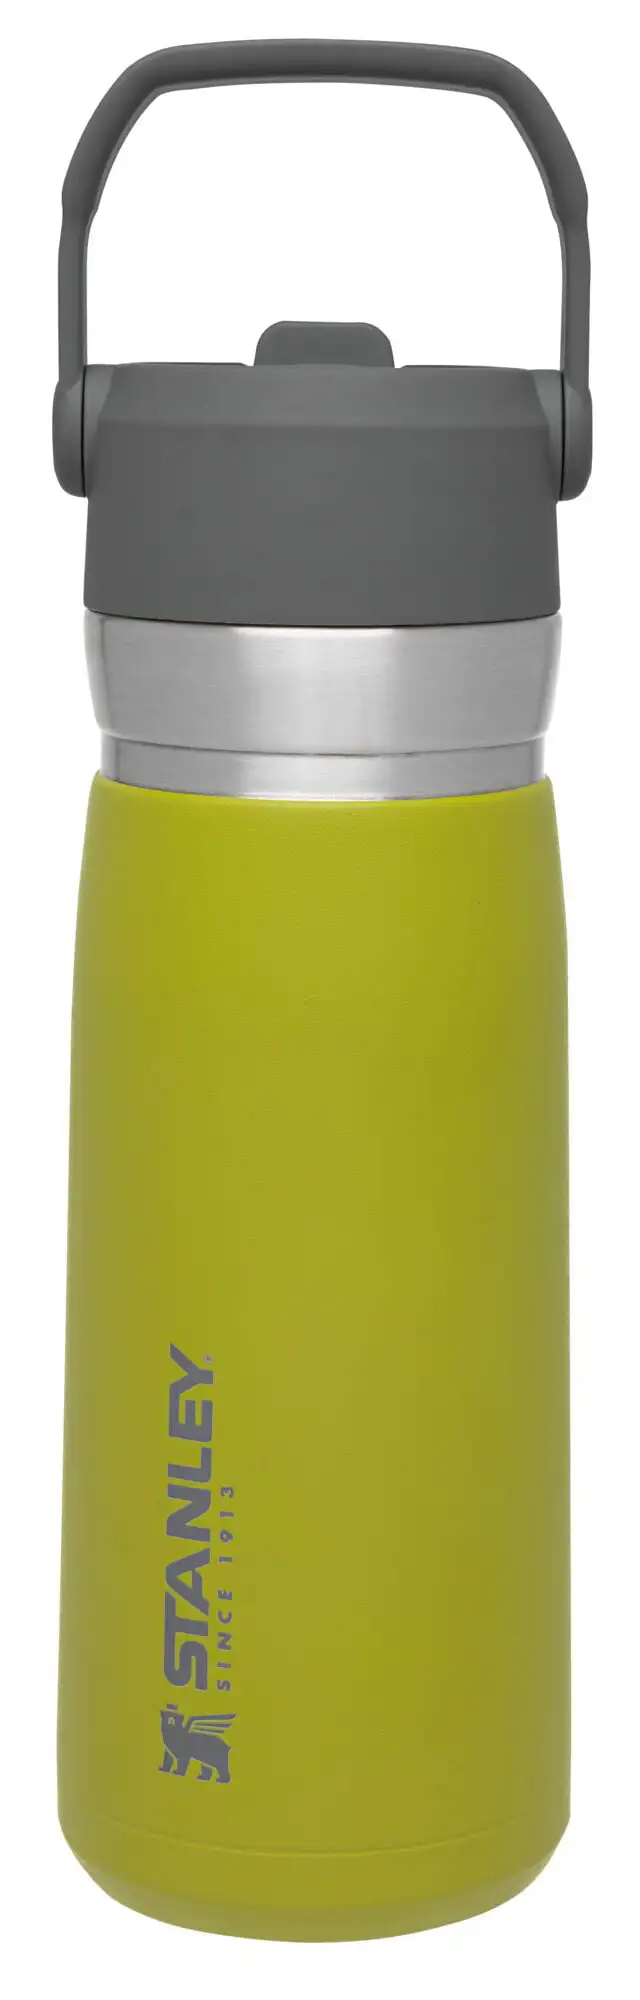 

oz Green and Silver Insulated Stainless Steel Water Bottle with Straw and Flip-Top Lid Tomatodo para agua Protein shaker bottle